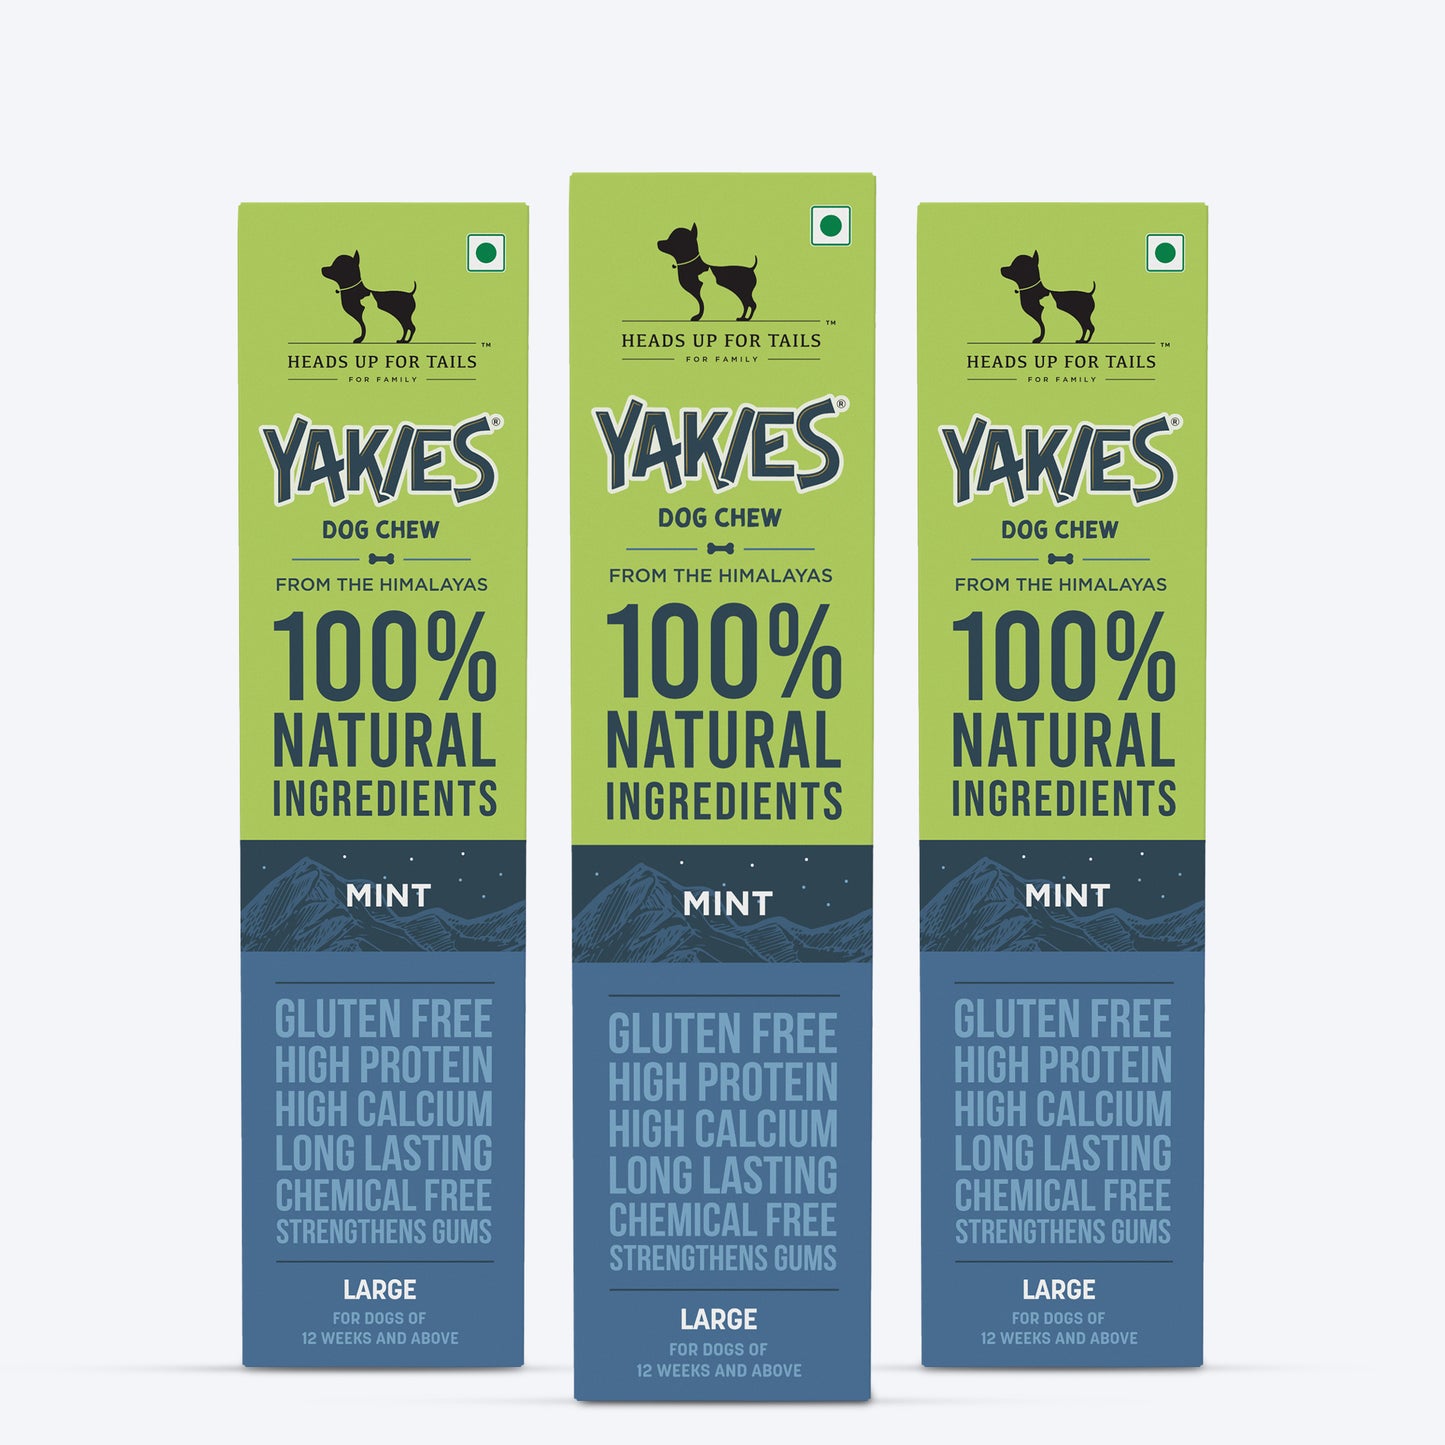 HUFT Yakies Vegetarian Natural Chew Bone - Mint - Heads Up For Tails